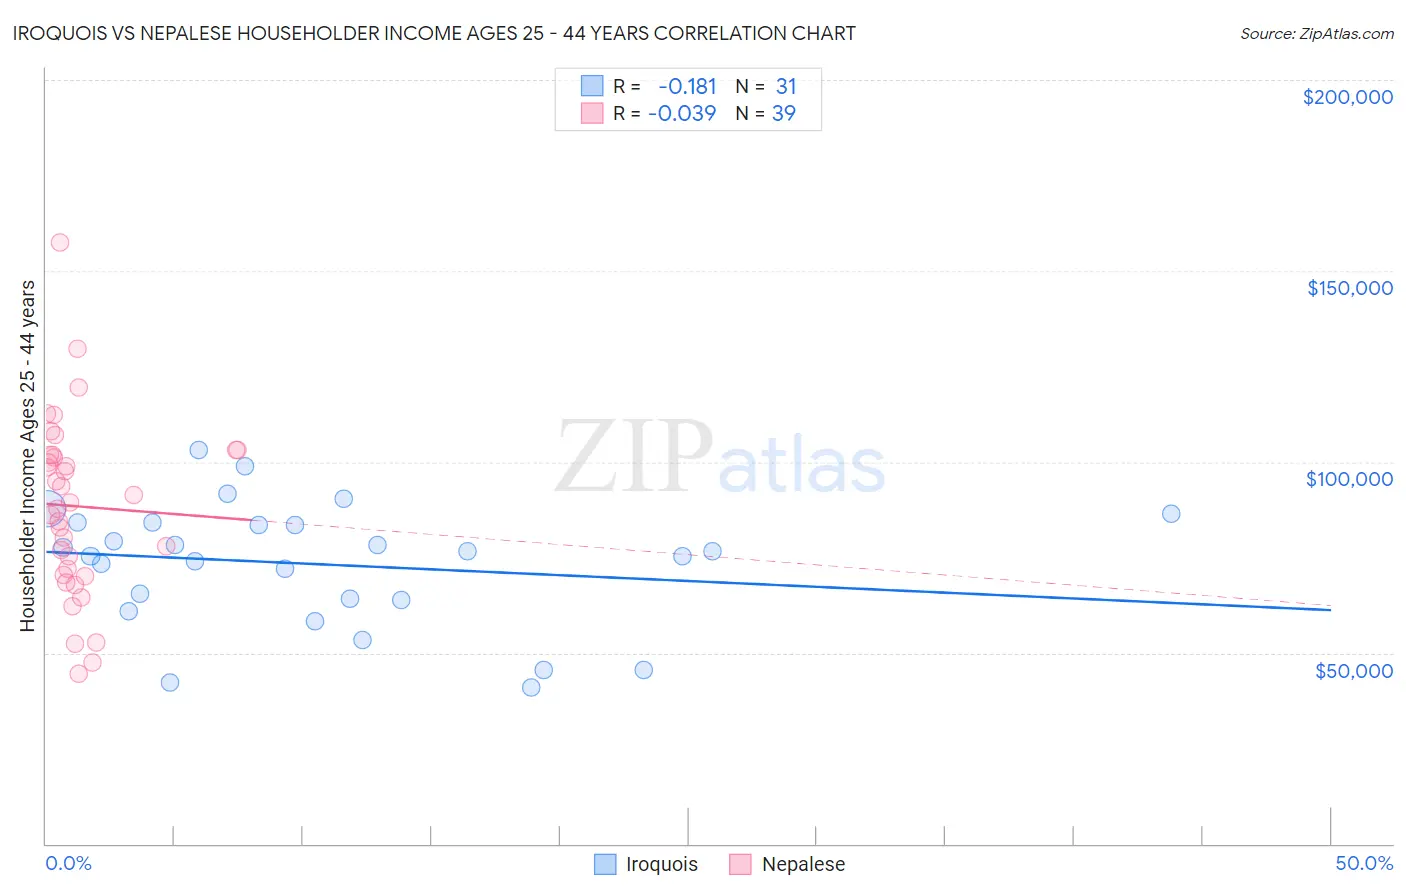 Iroquois vs Nepalese Householder Income Ages 25 - 44 years